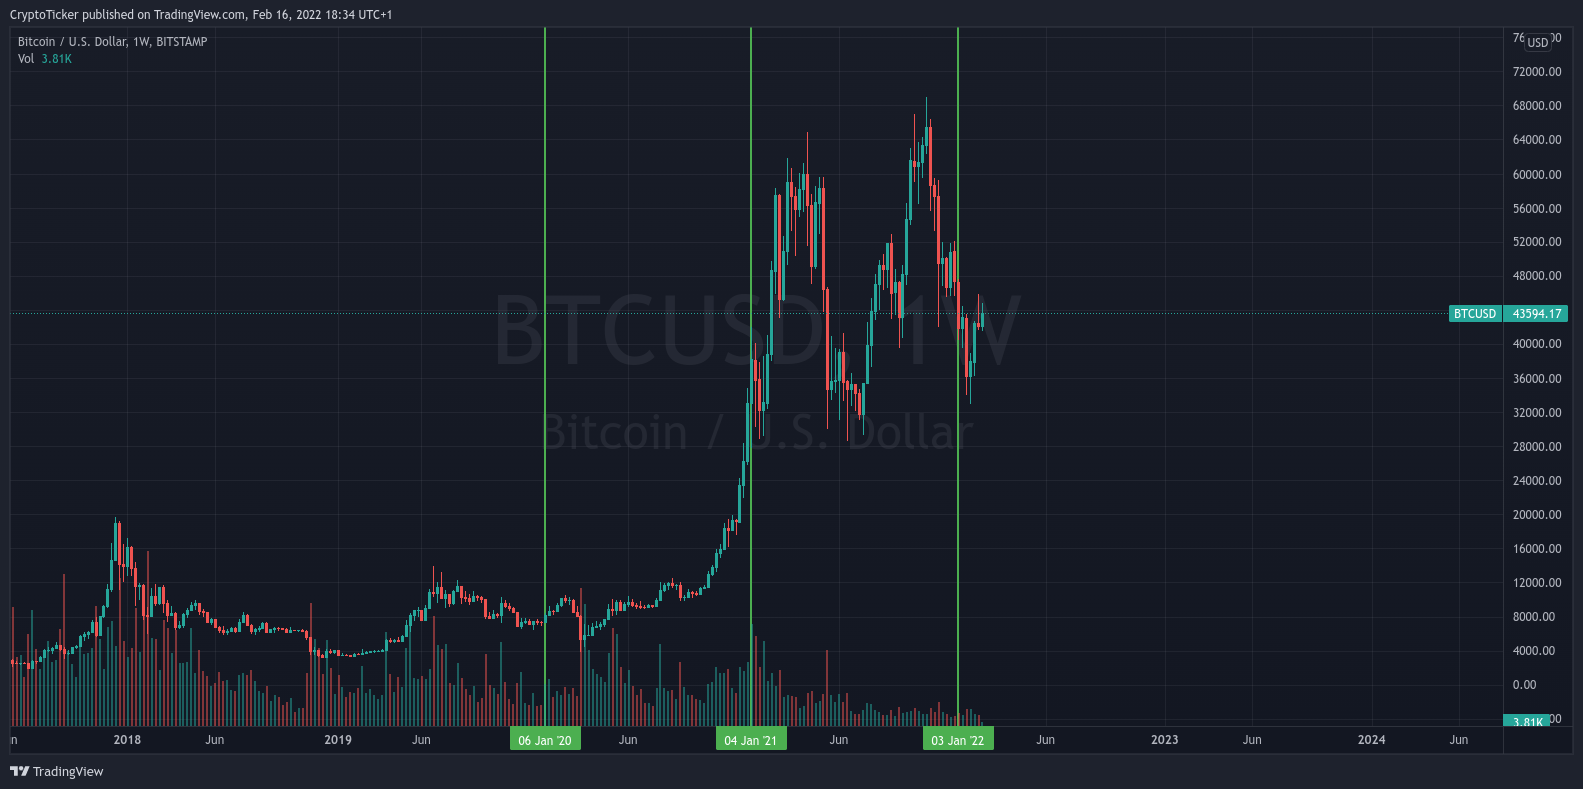 Can Bitcoin reach 100k? BTC/USD 1-week chart showing Bitcoin cycles over the years